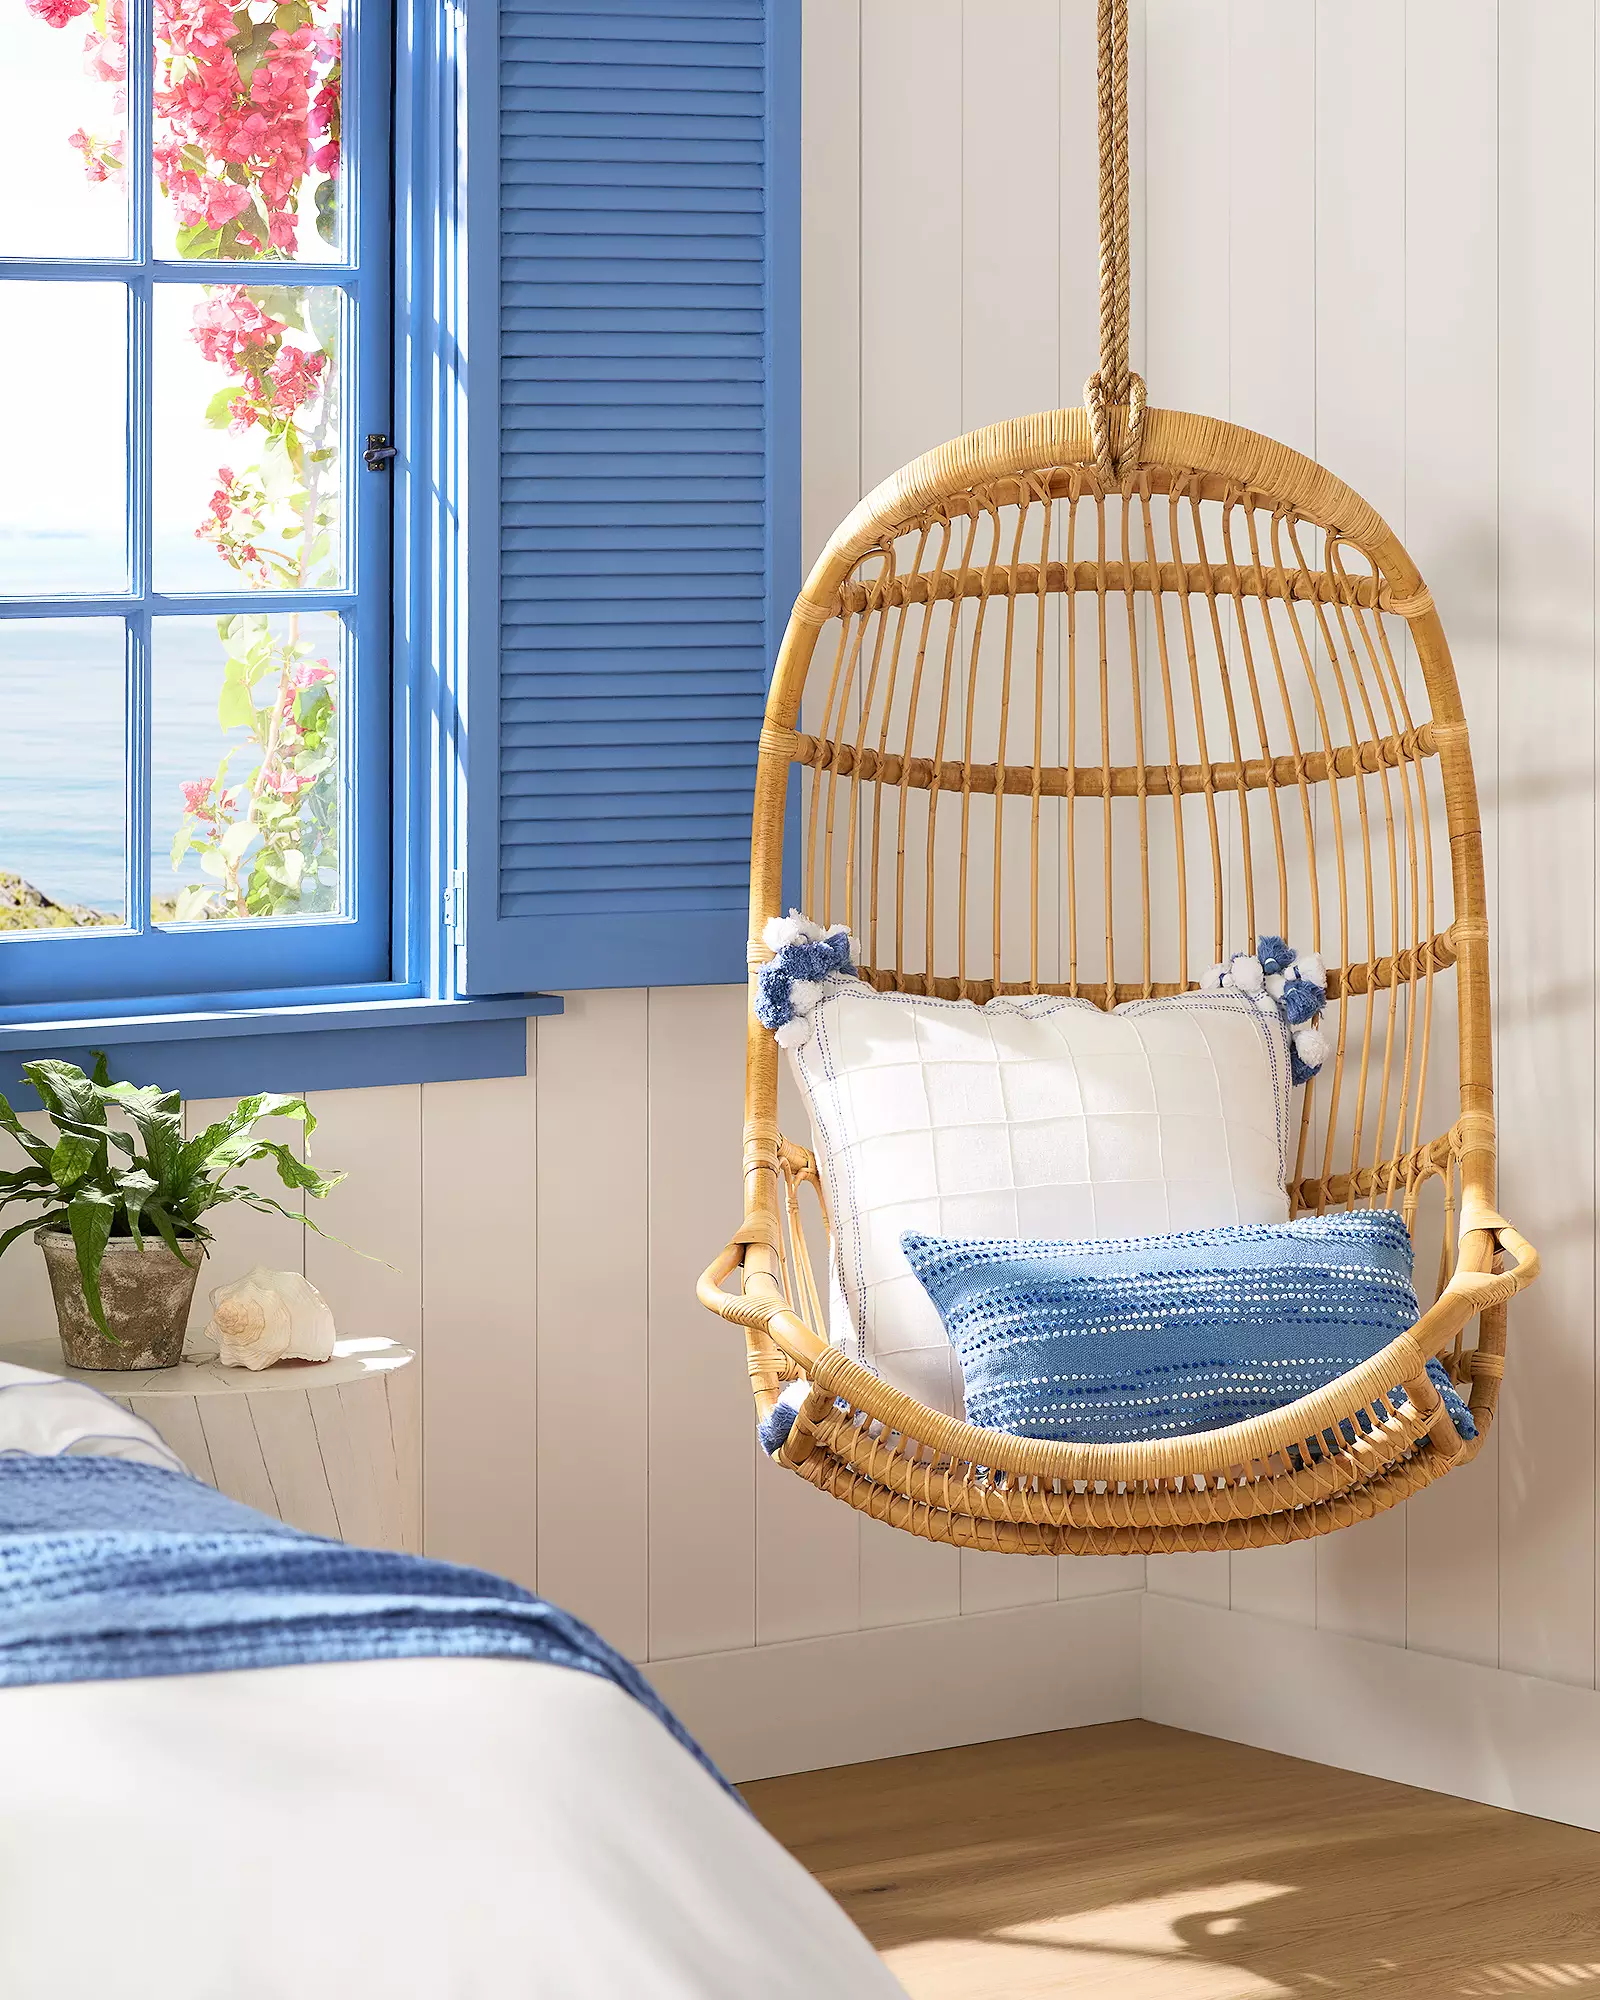 hanging rattan chair in room with blue theme boho coastal decor